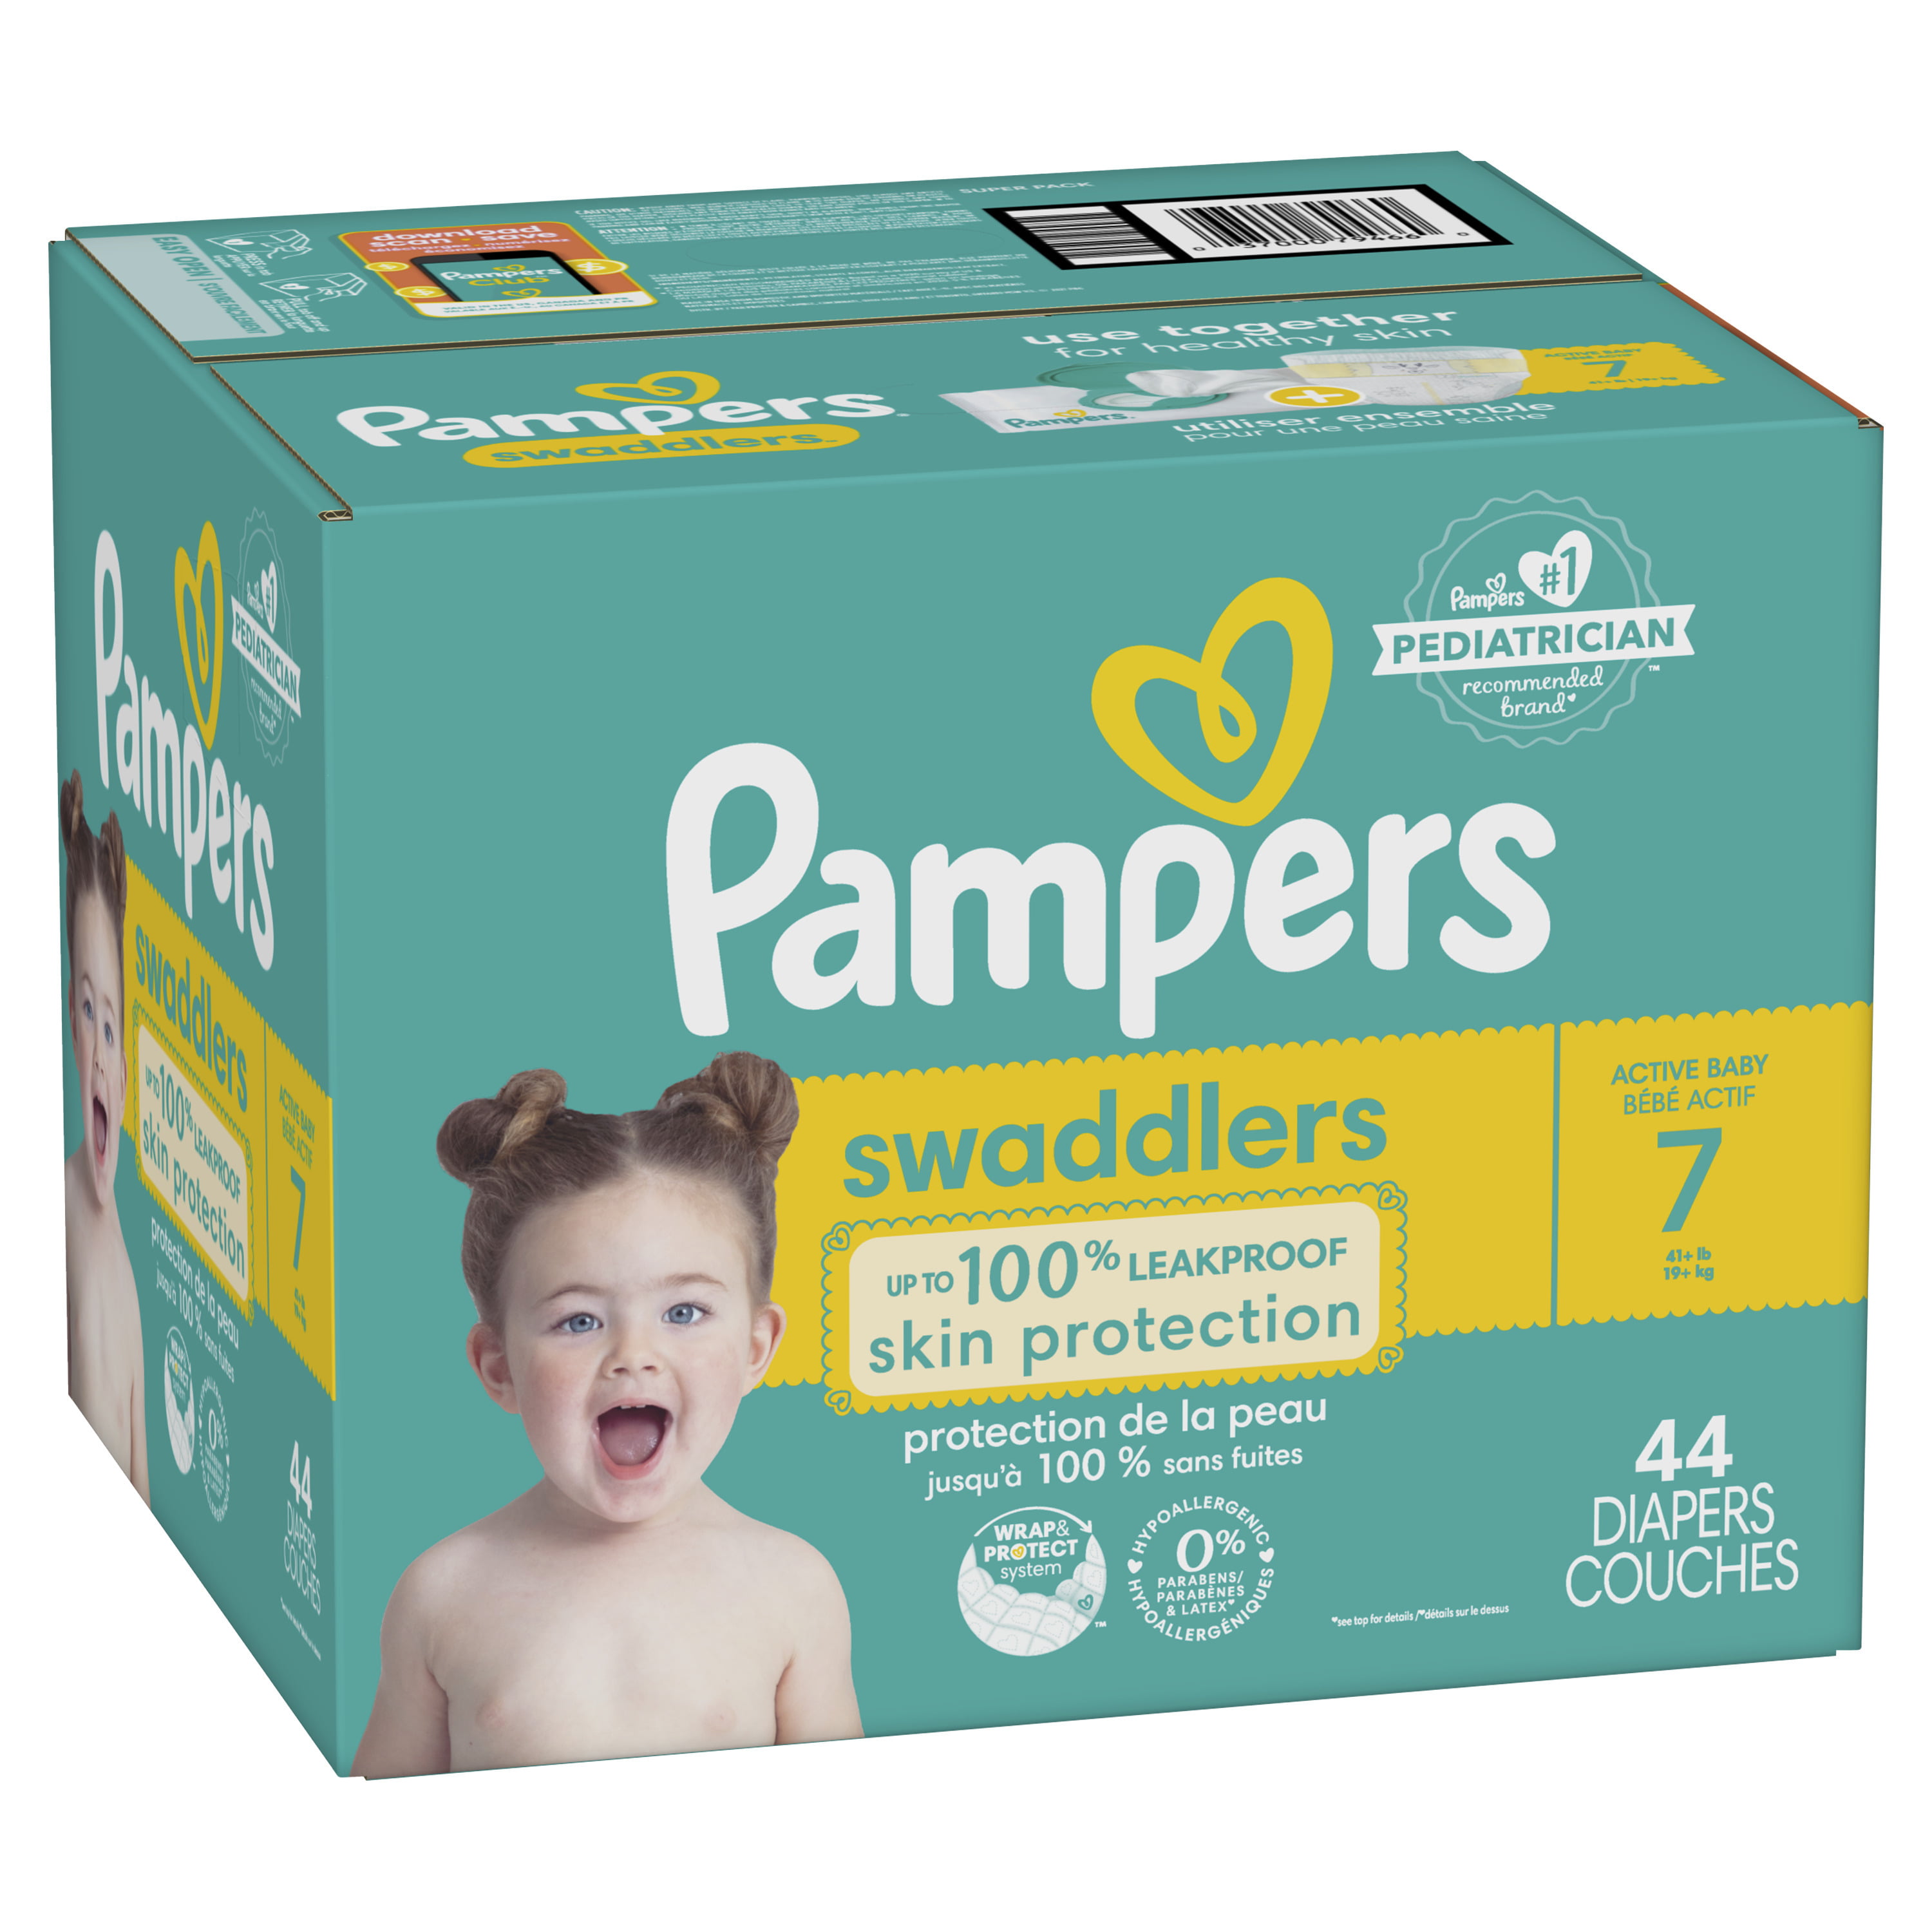 Pampers Swaddlers Diapers (Choose Your Size & Count) - 2